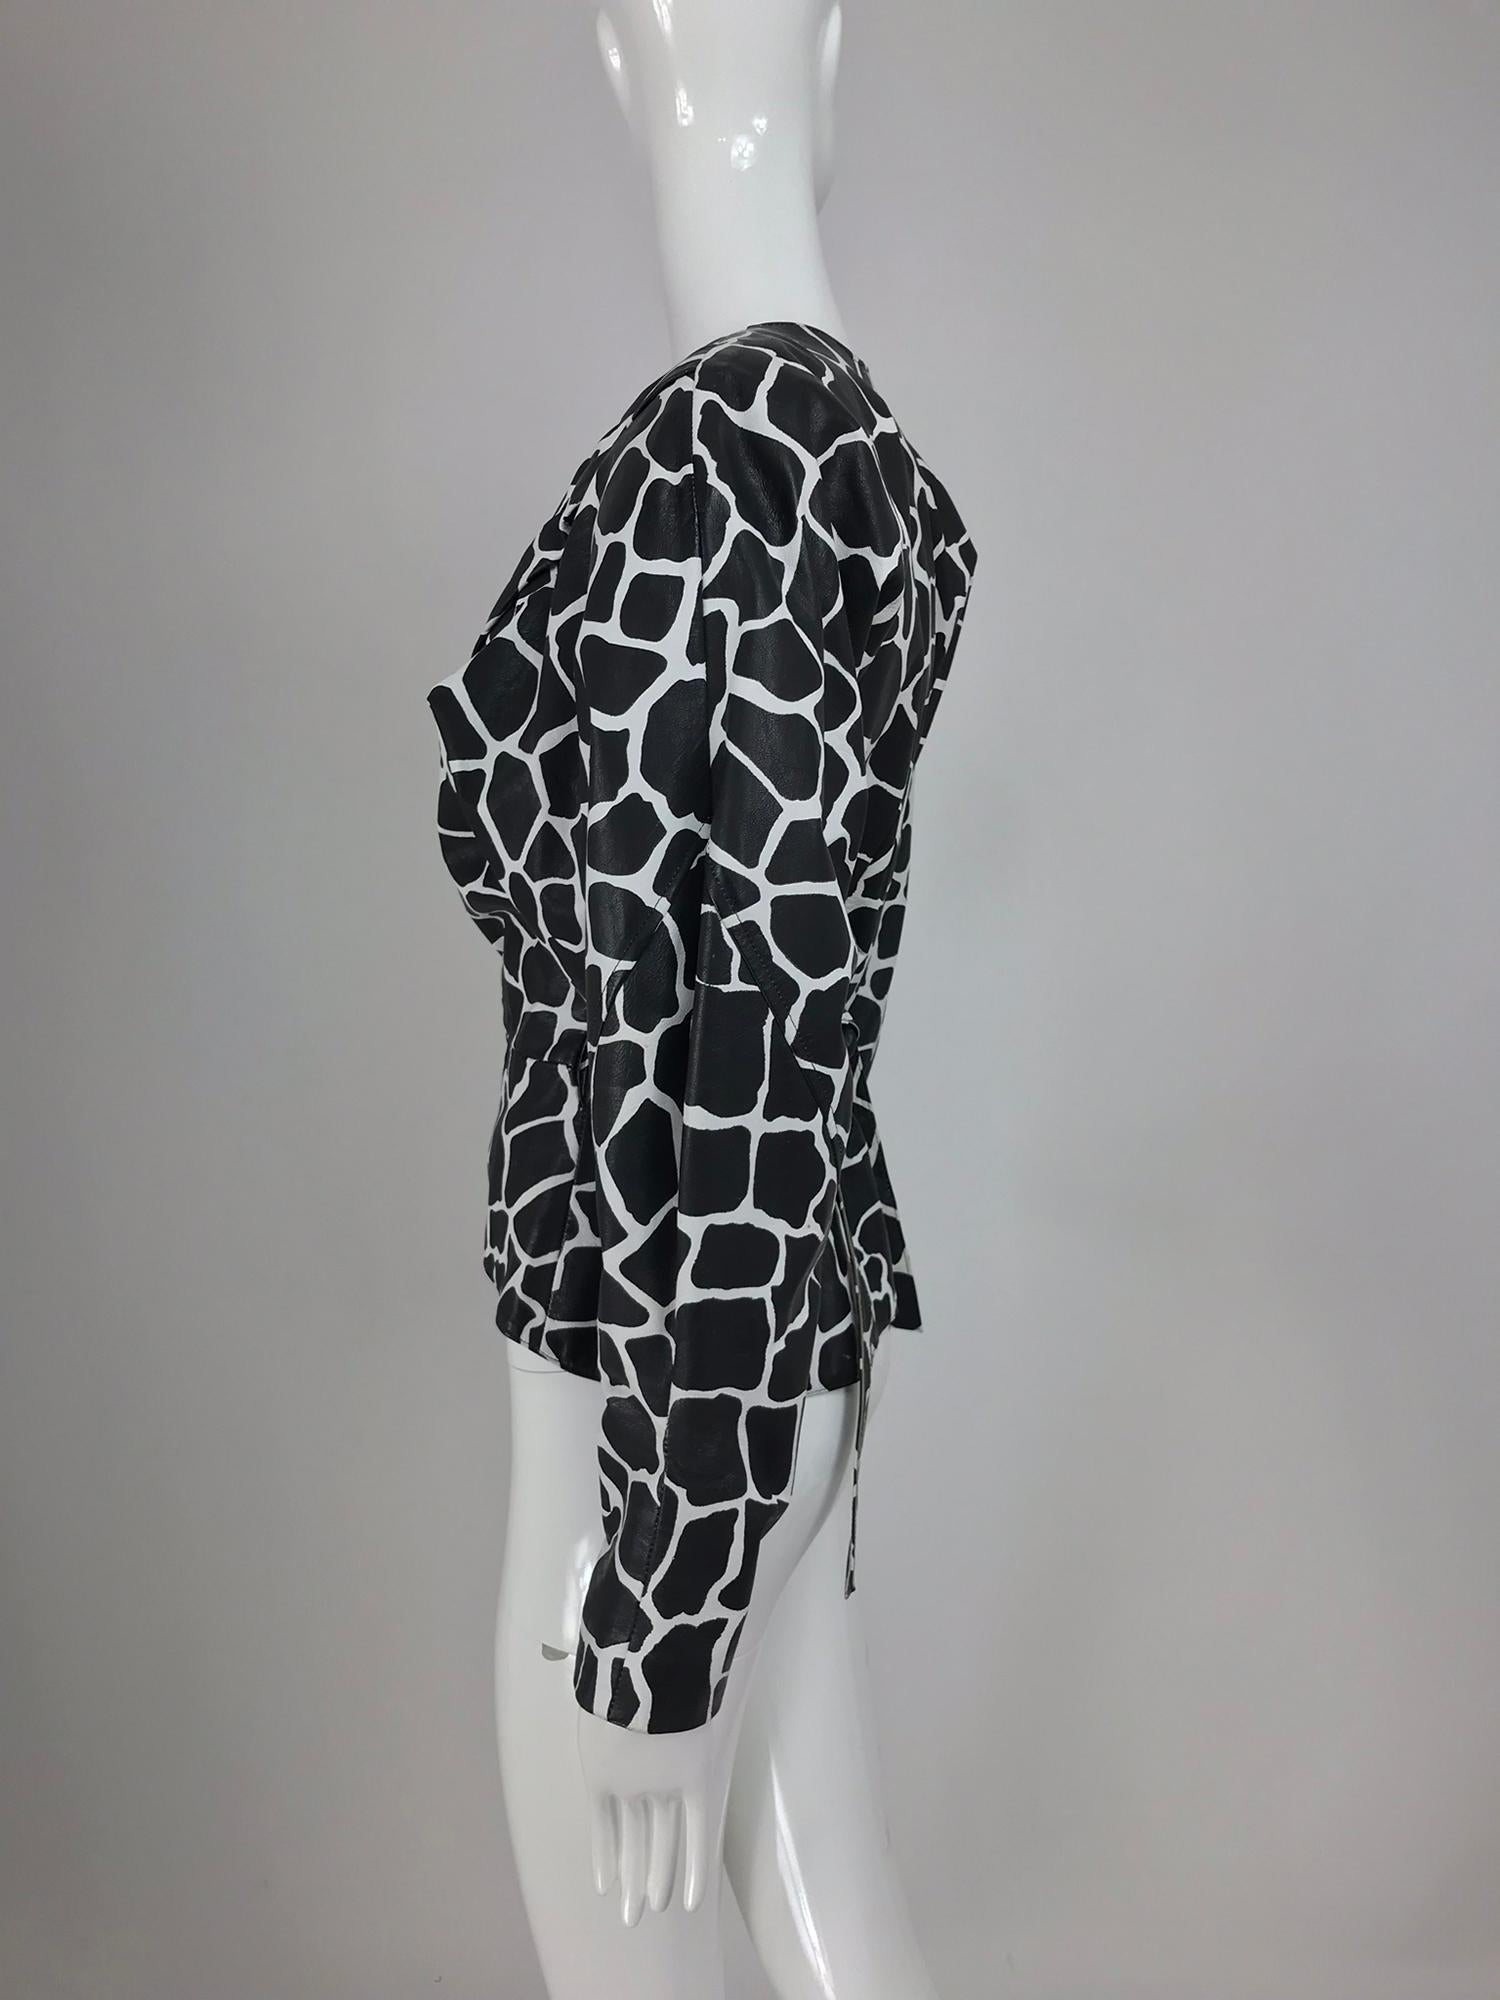 Jean Claude Jitrois Black and White Animal Print Leather Jacket 1980s For Sale 1